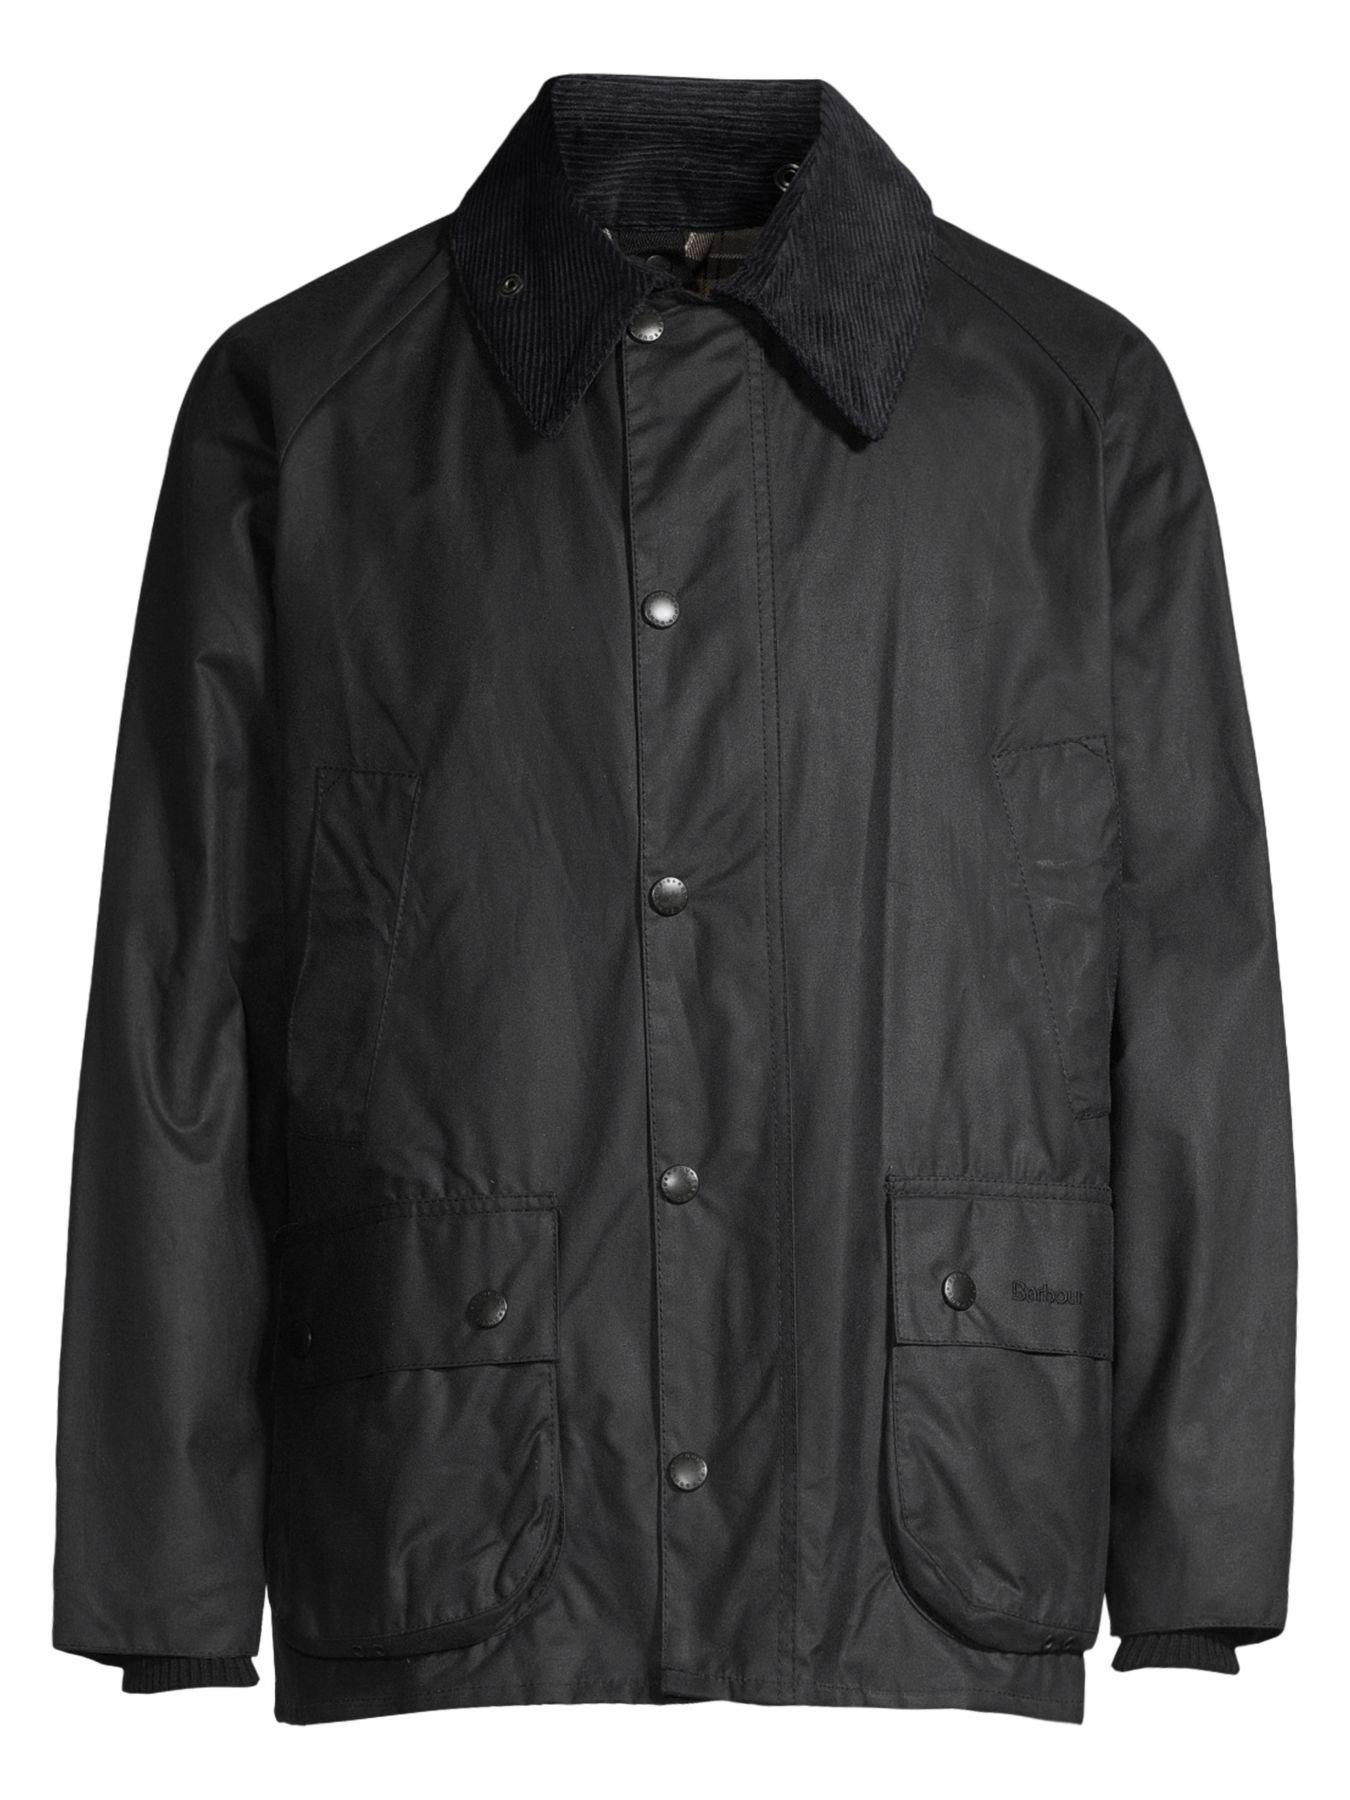 Barbour Cotton Classic Bedale Jacket in Navy (Blue) for Men - Lyst